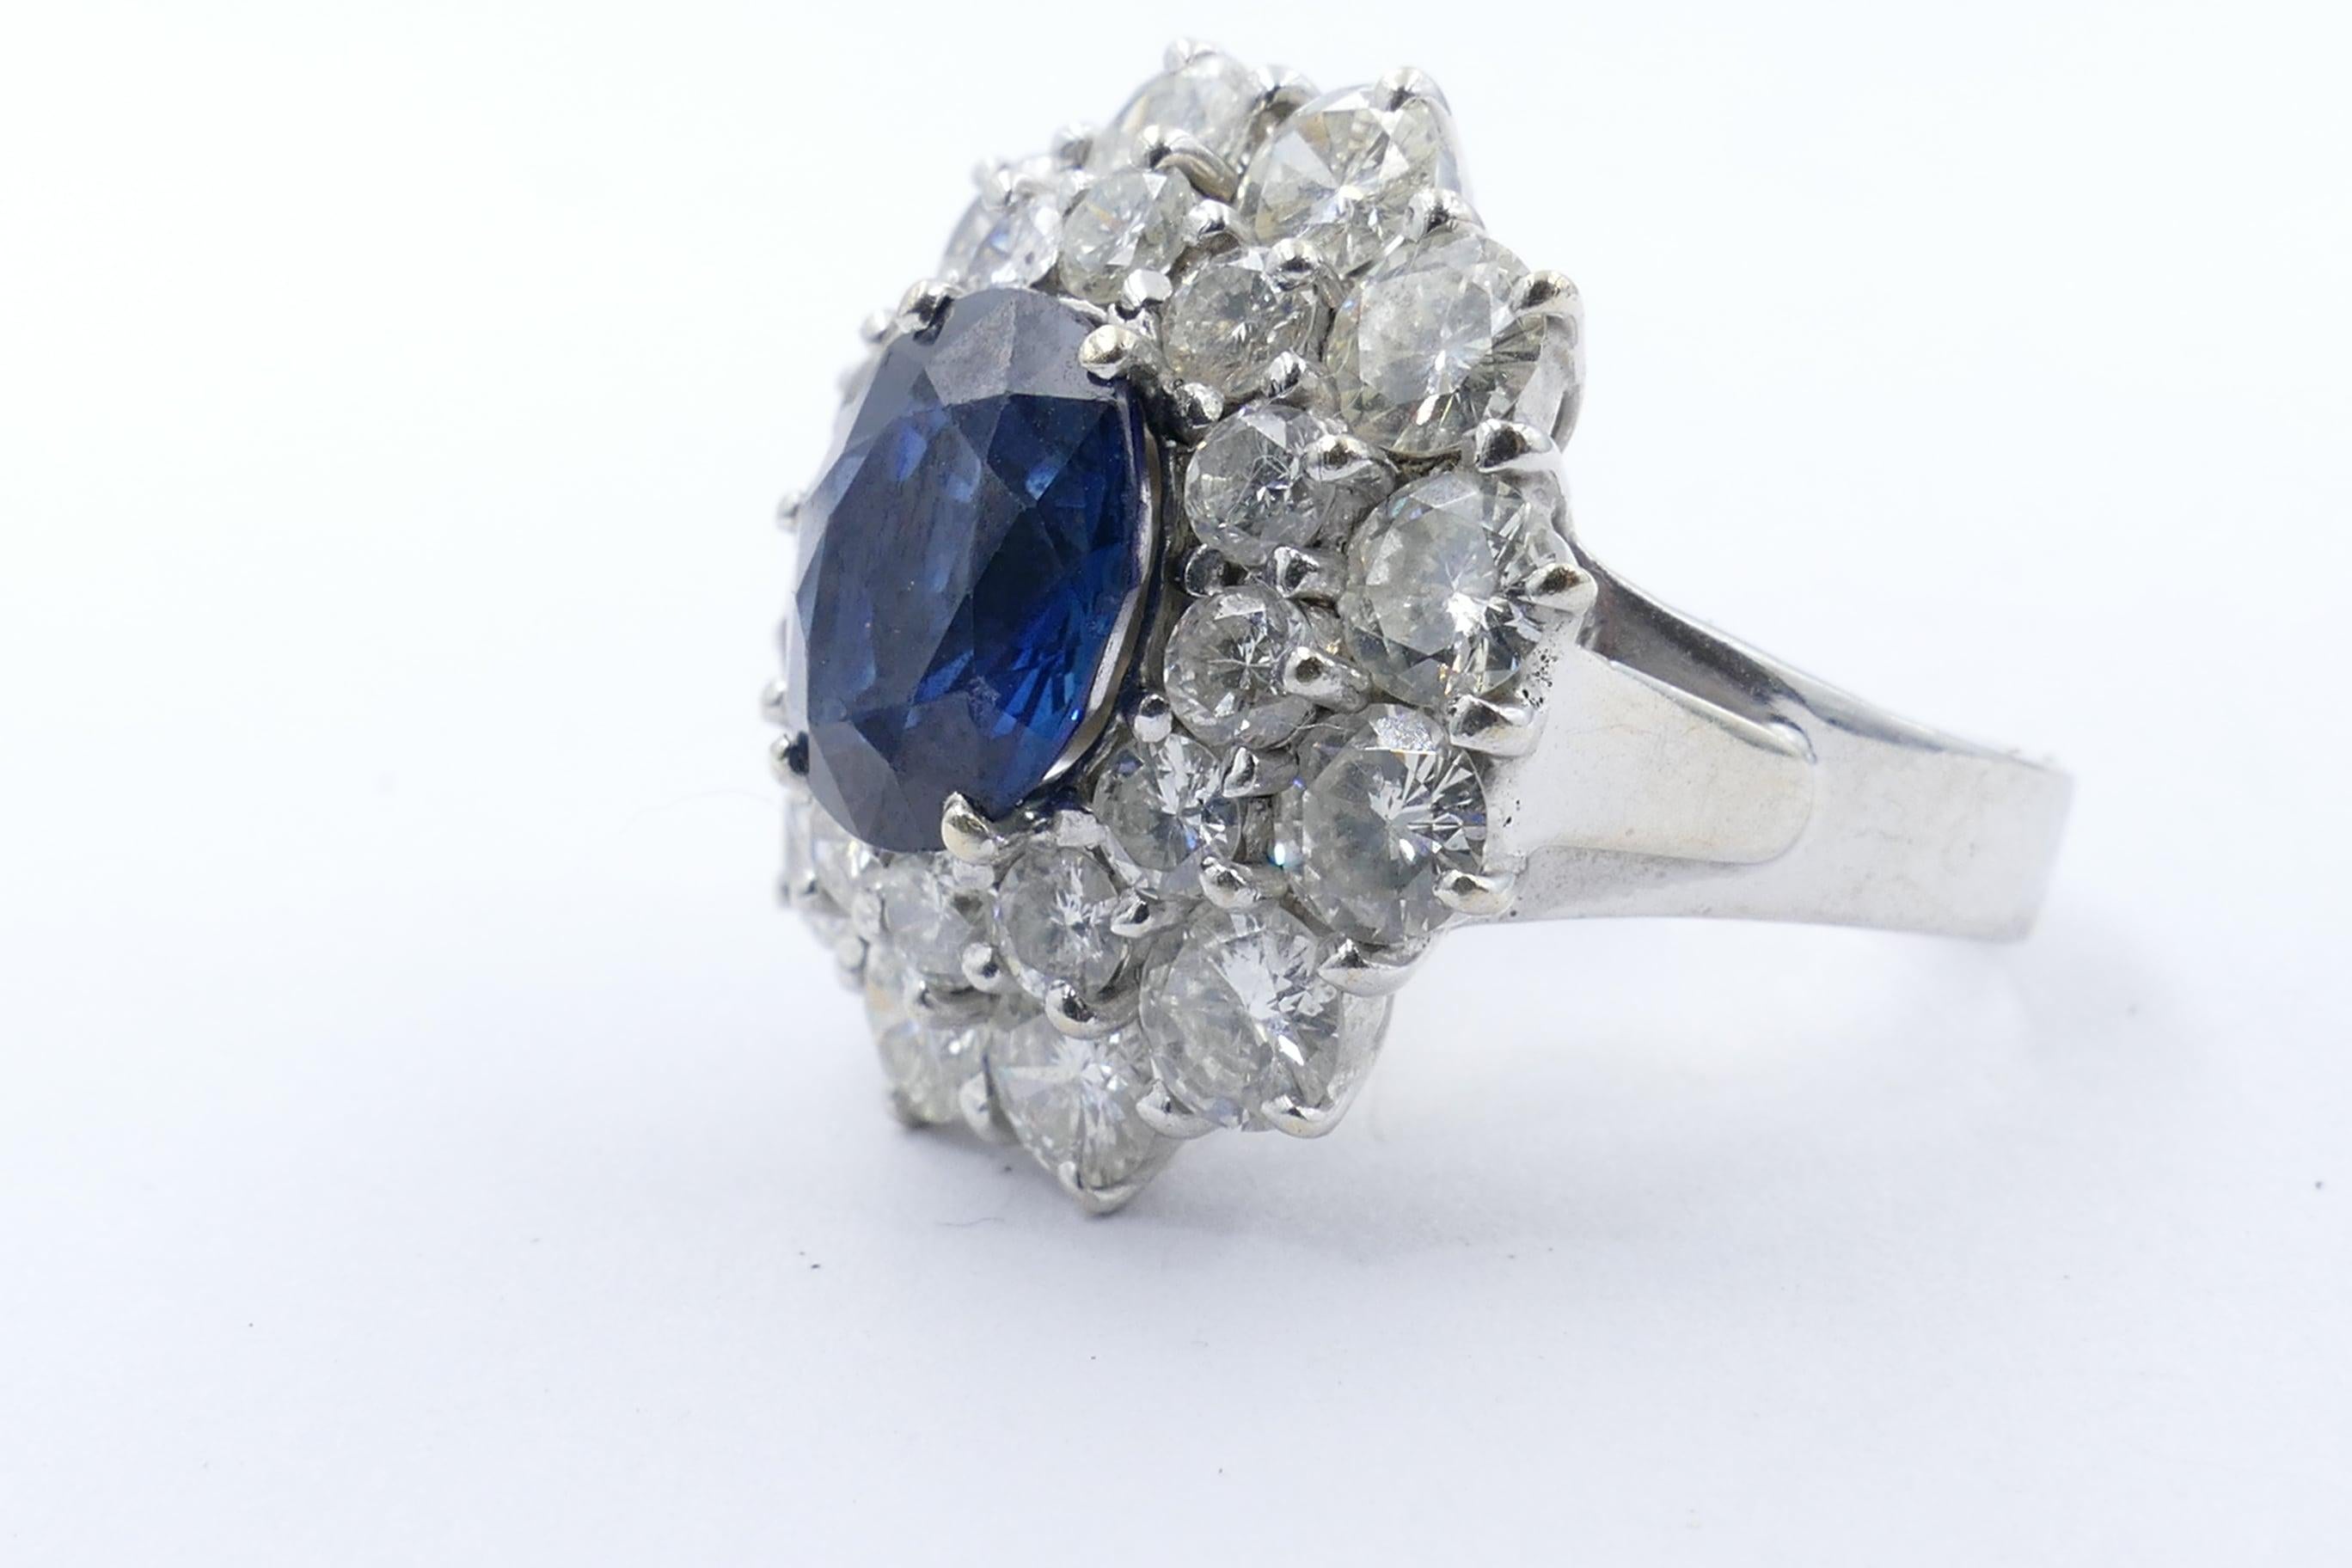 This is truly a most beautiful Ring.
A stunning deepish blue oval cut Sapphire, claw set, 3.50 carats in weight surrounded by 12 round brilliant cut Diamonds, 0.60 carats, inner halo set around the centre stone.
The outer Diamonds are very good